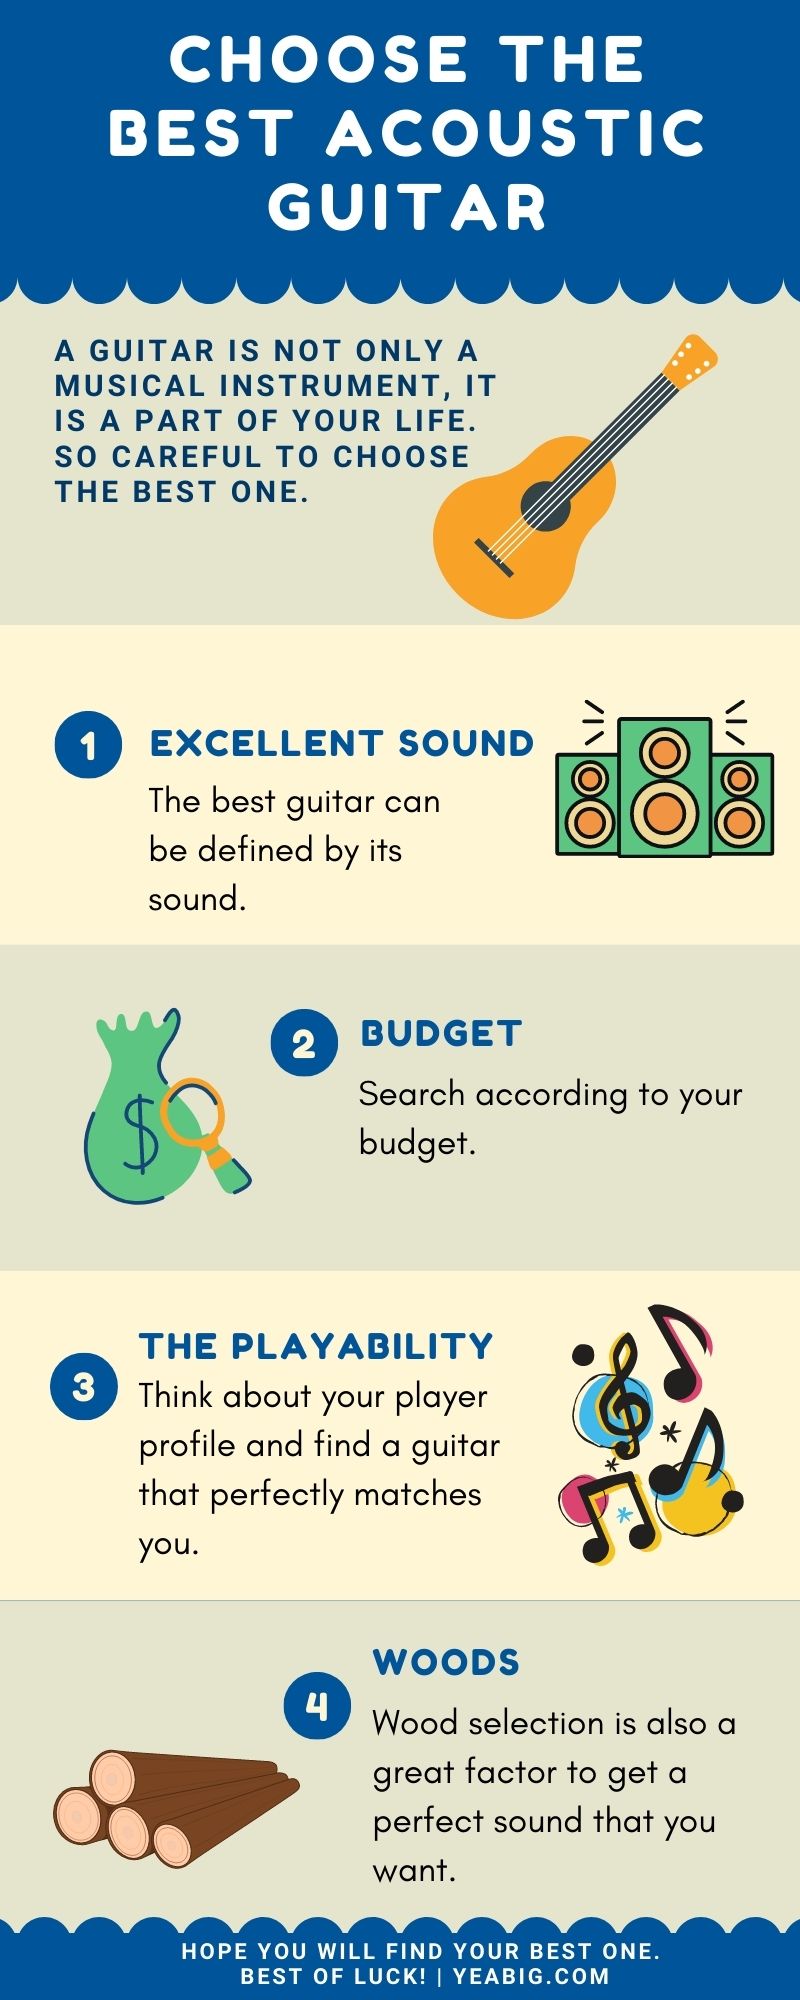 How to Choose the Best Acoustic Guitar? (infographic)